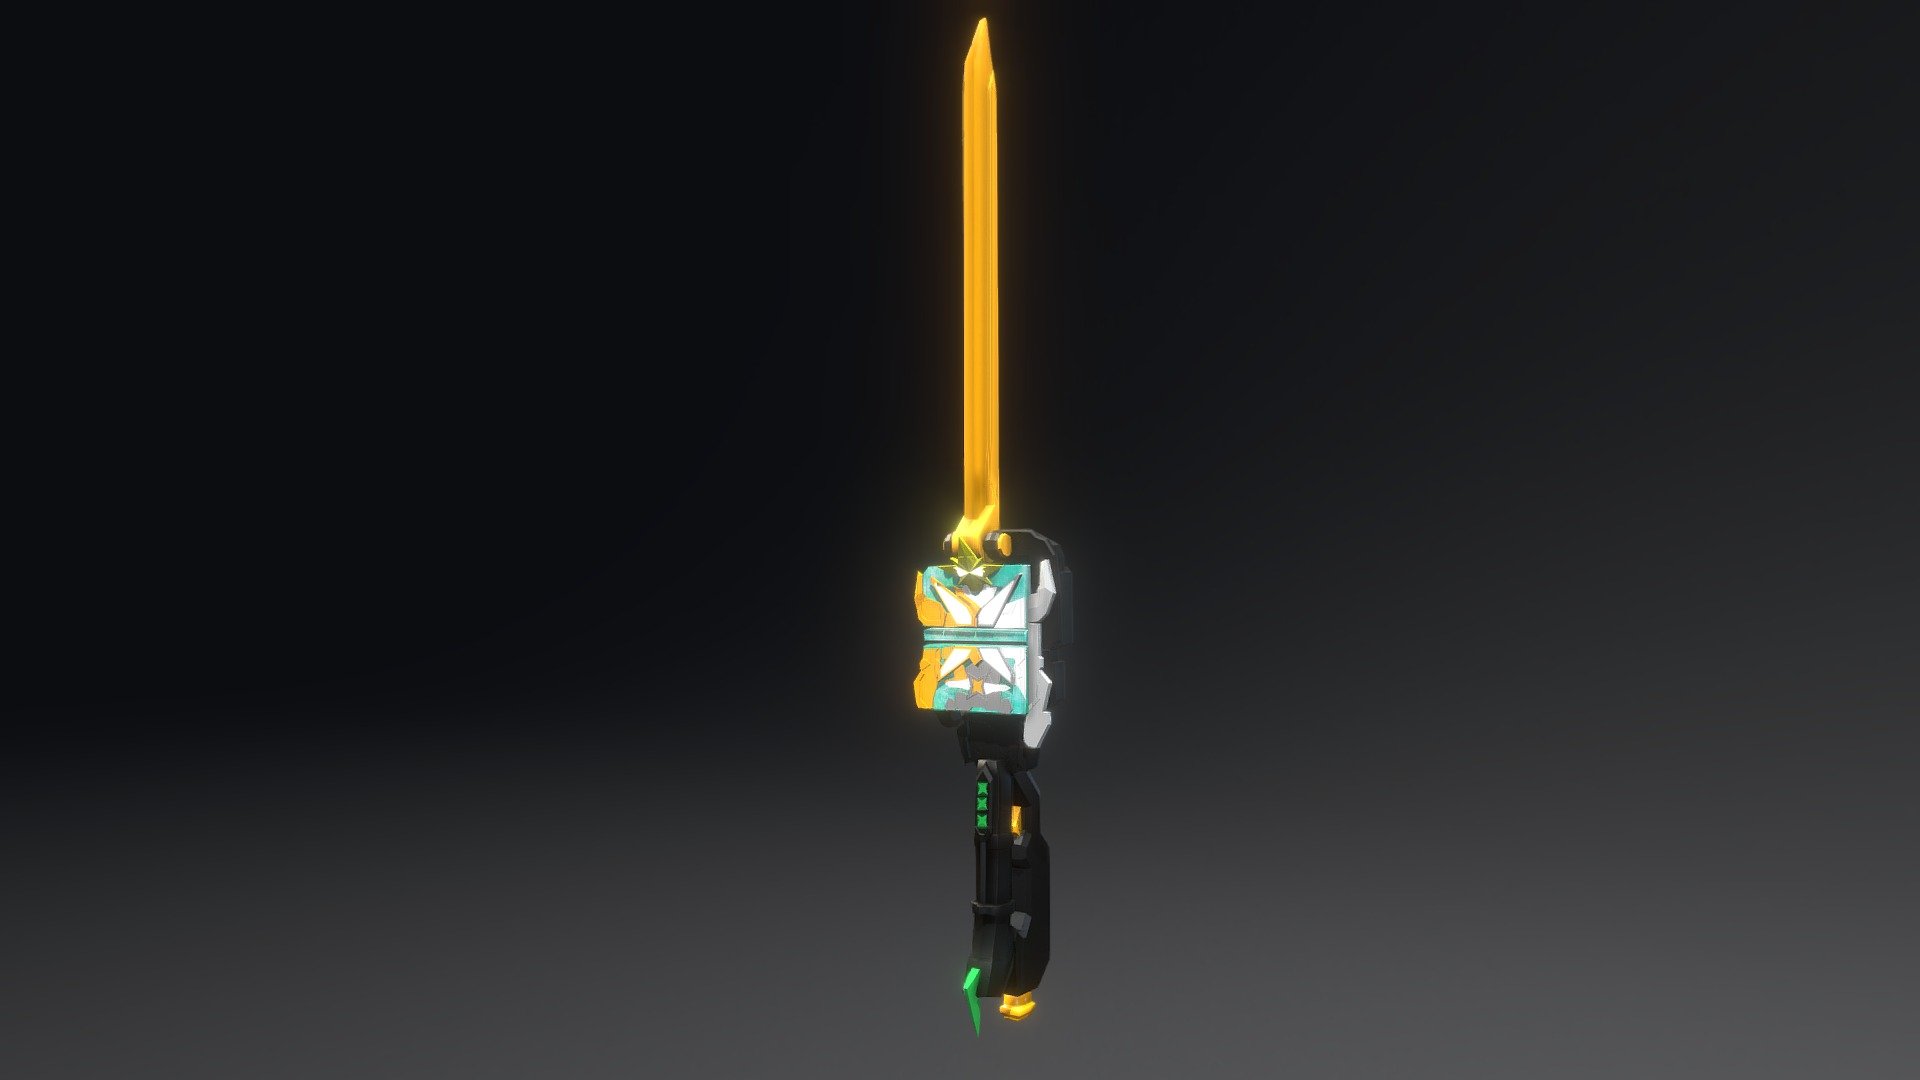 Its been long time since i share my work.Here is one of my Work i'hve done.

the weapon of one of the characters from the kamen rider saber series, kamen rider saikou

Disclm: Made by Blender 2.91. Made it from scratch 3d model